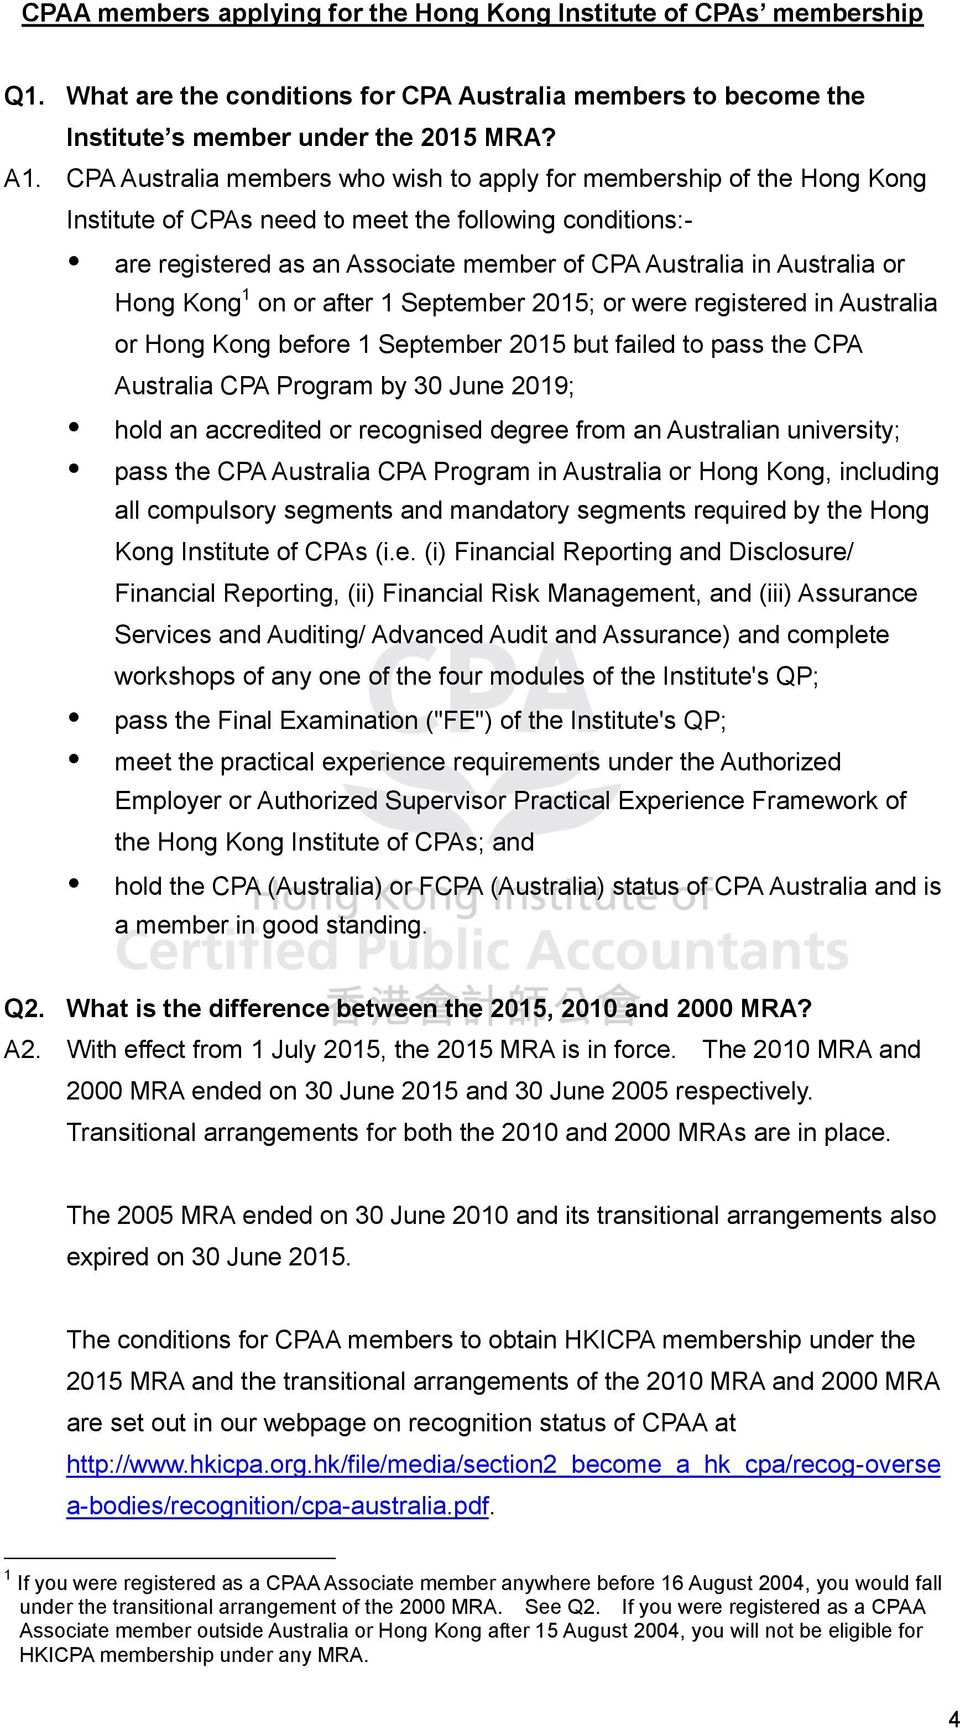 or Hong Kong 1 on or after 1 September 2015; or were registered in Australia or Hong Kong before 1 September 2015 but failed to pass the CPA Australia CPA Program by 30 June 2019; hold an accredited